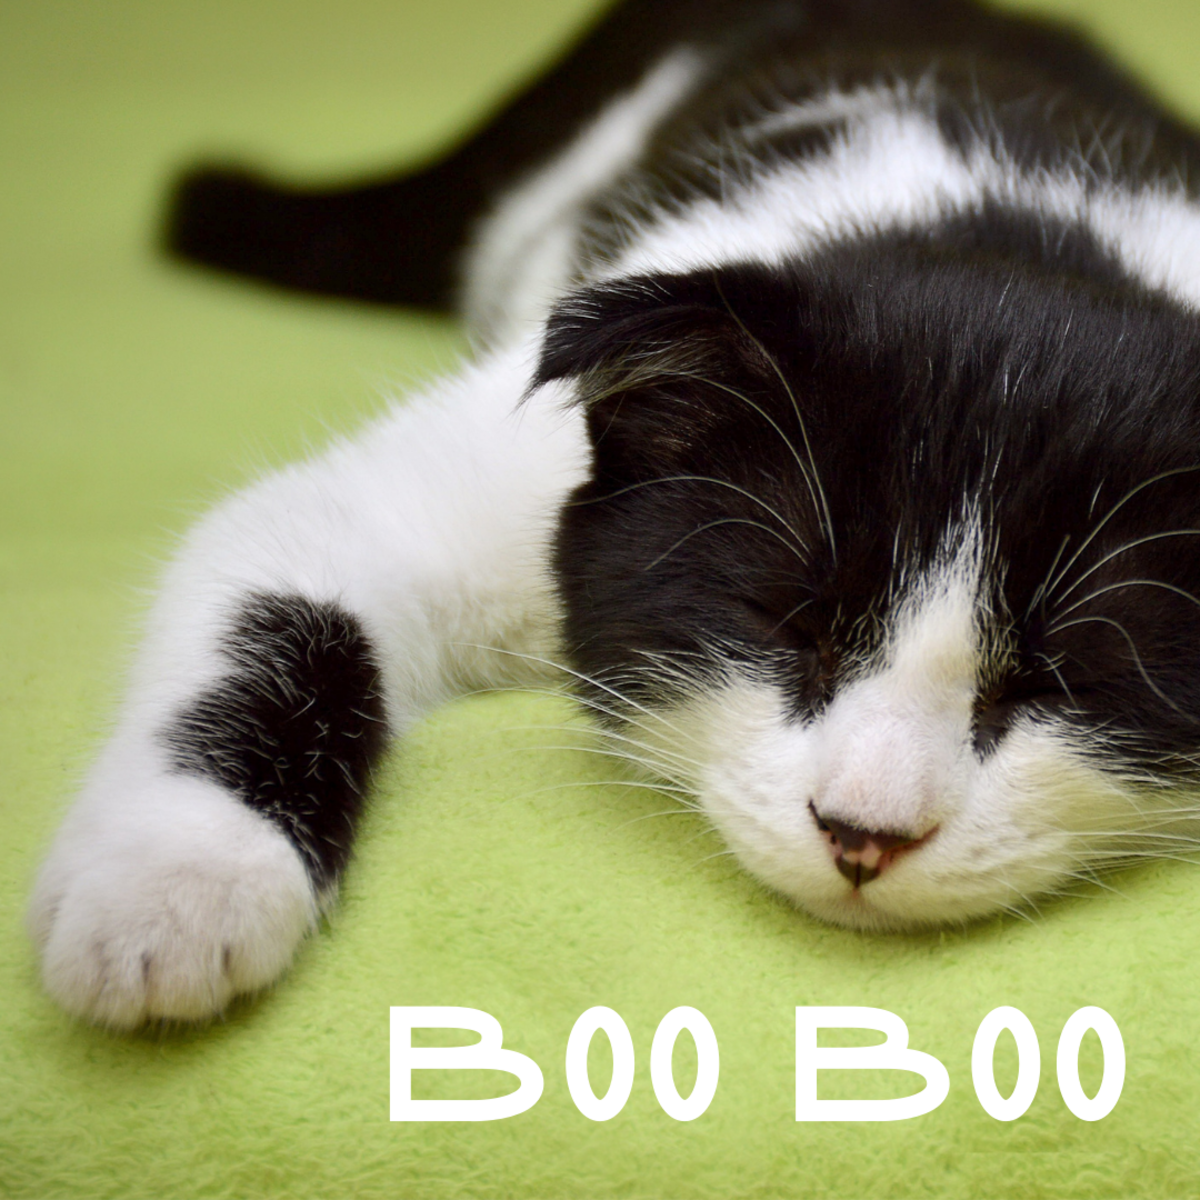 50+ Cute Cat Names - Adorable Names To Give a Boy or Girl Kitten